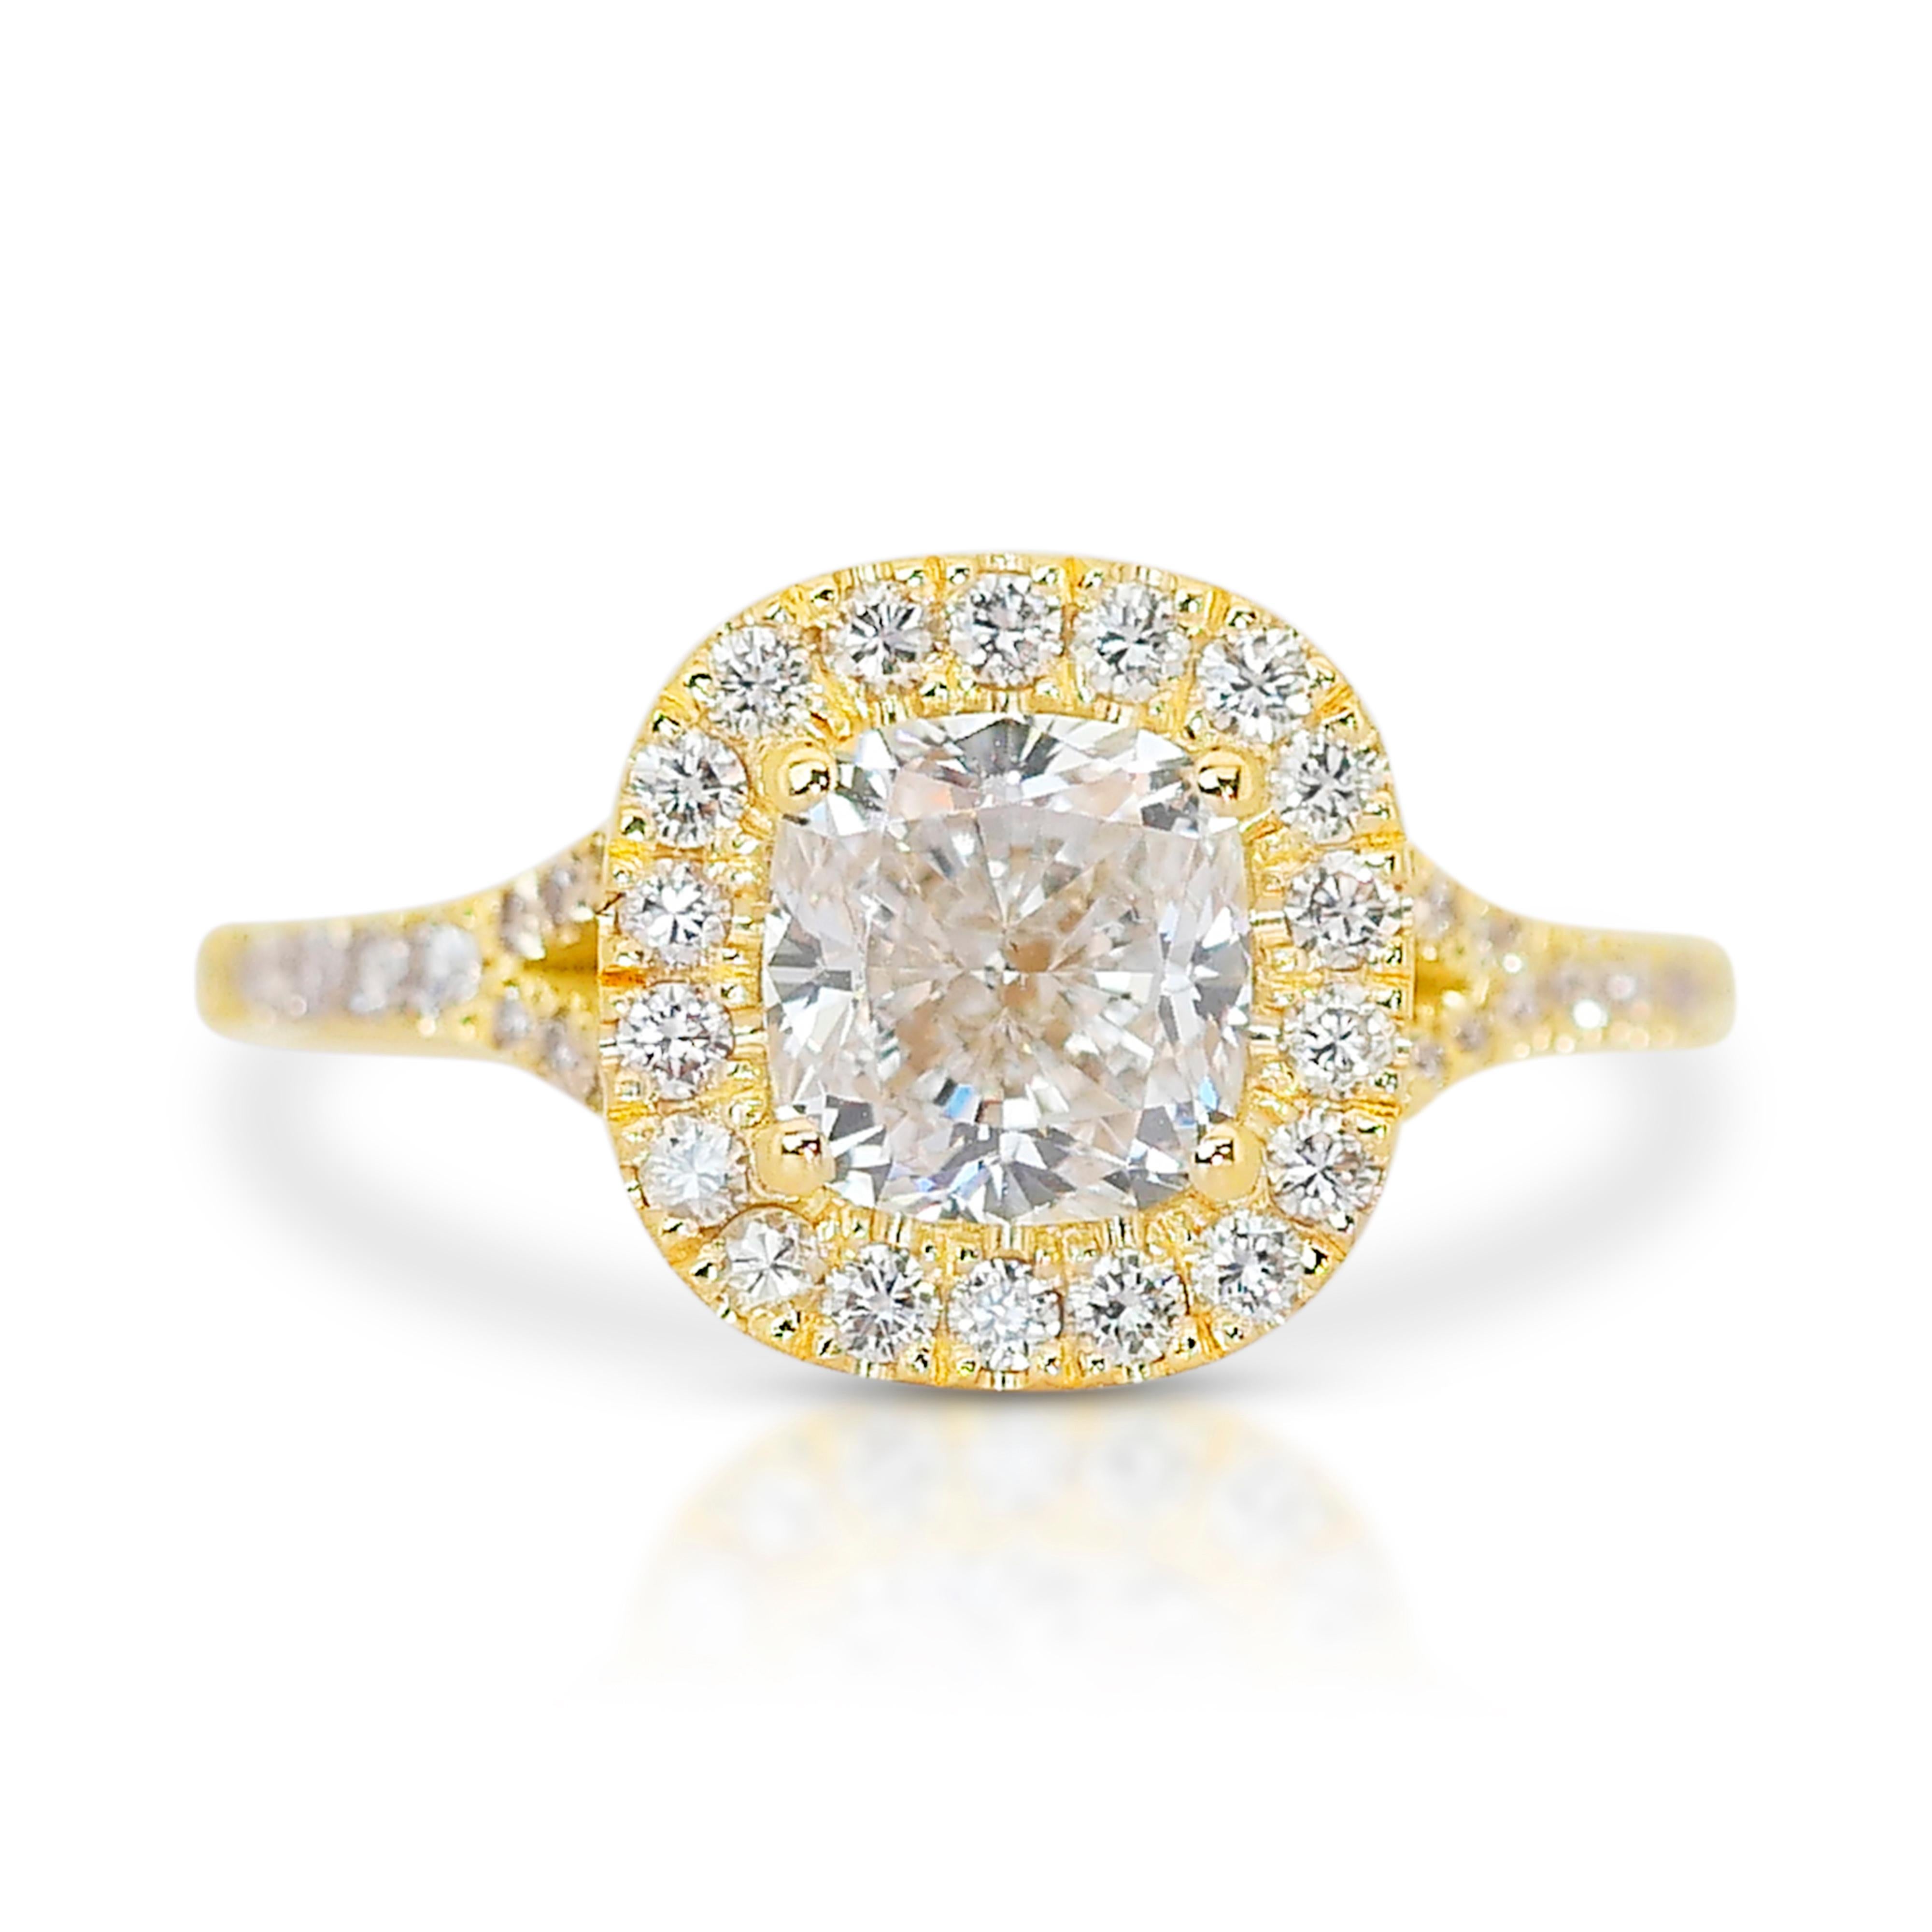 Dazzling 18k Yellow Gold Diamond Halo Ring w/1.85 ct - IGI Certified

Immerse yourself in the epitome of sophistication with this exquisite 1.85-carat total-weight diamond halo ring, masterfully crafted in lustrous 18k yellow gold. At the heart of